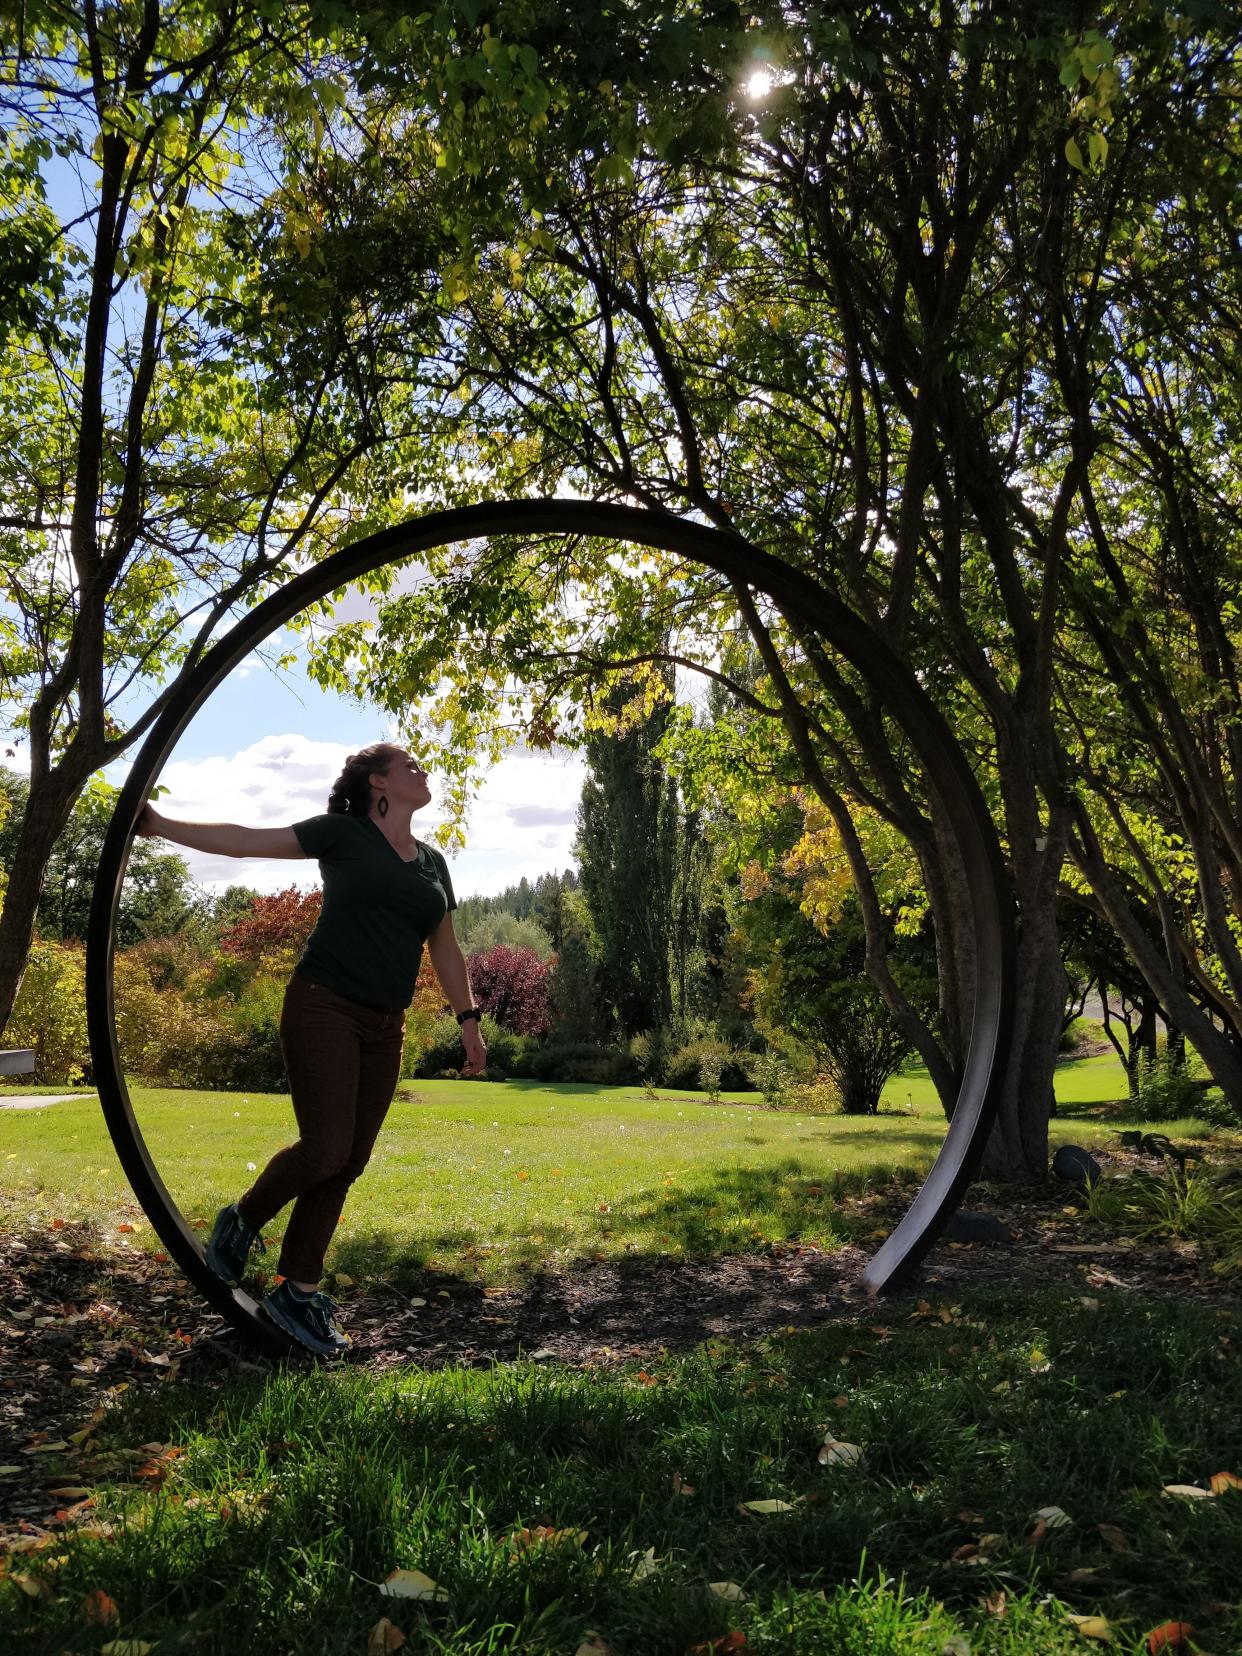 Mary Ruth Kamp and Expanding Circles Collective3, LLC, will lead the Writing Circle on Nov. 18.